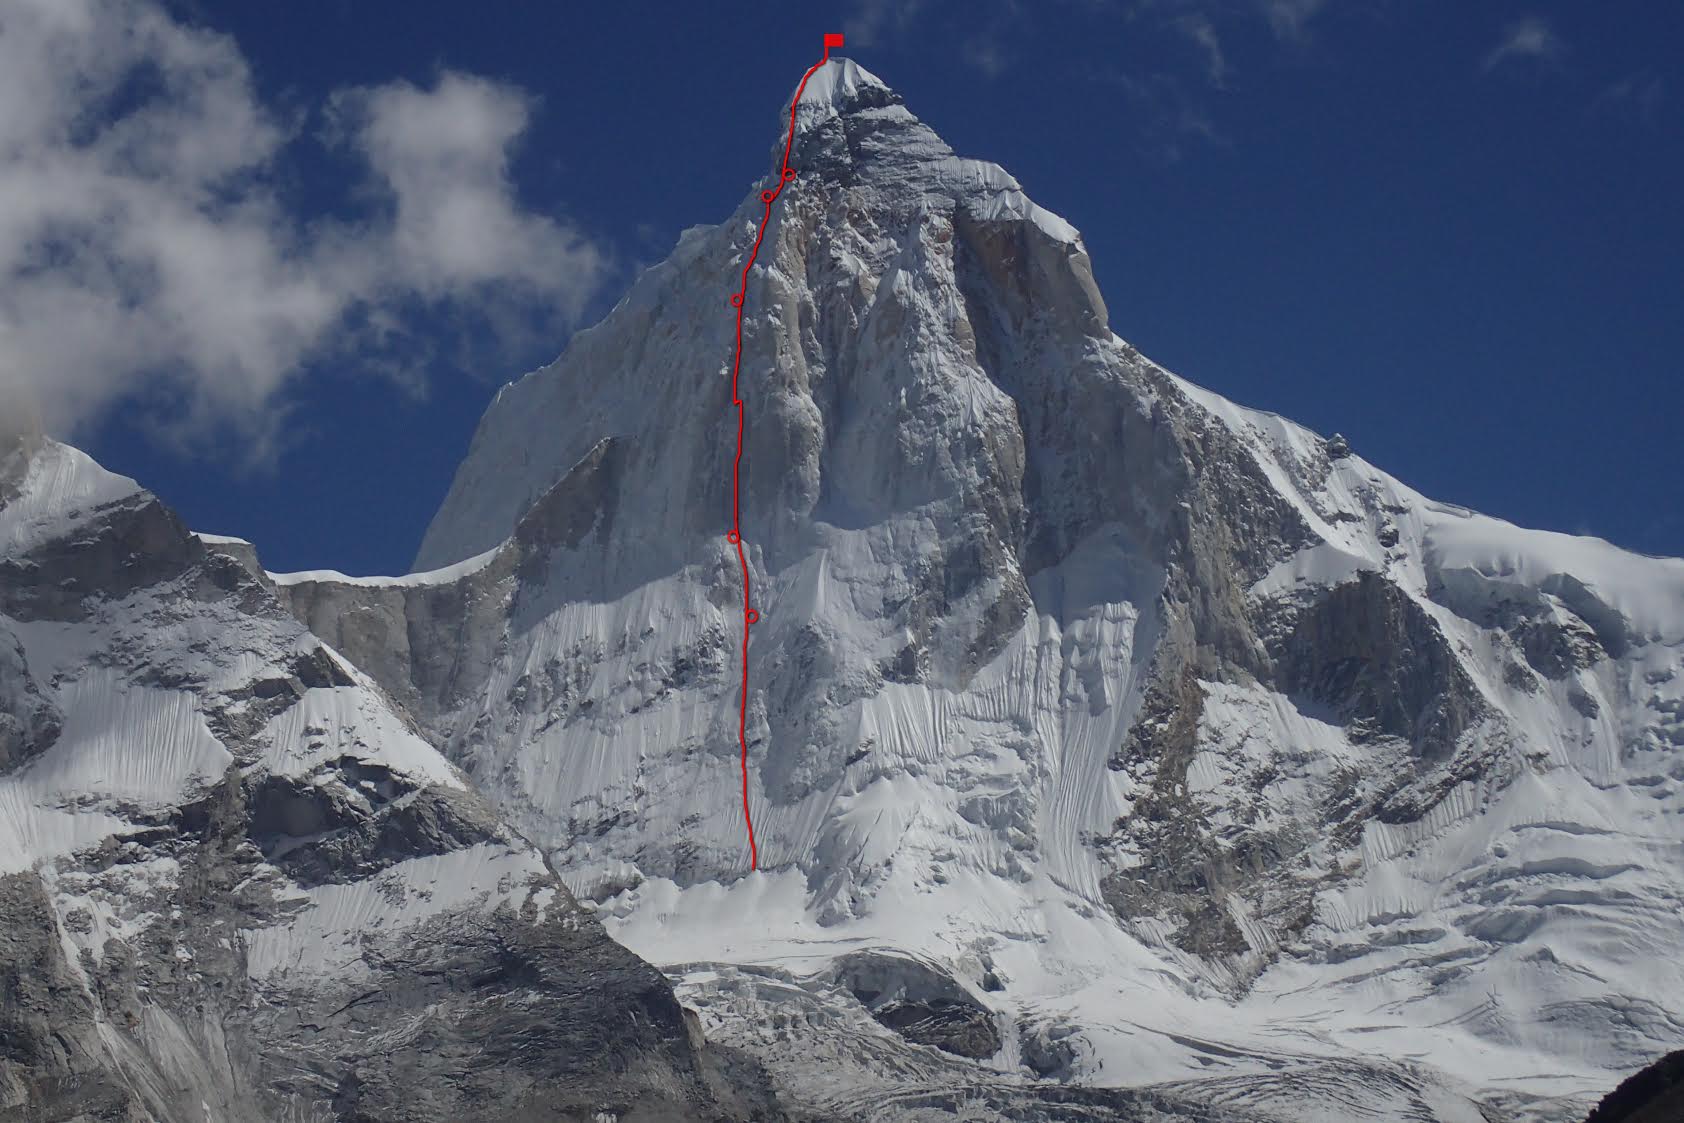 The red line marks the route and camps of Moveable Feast (ED2 M7 WI5 5c A3, 1400m) on Thalay Sagar (6904m), India. [Photo] Courtesy of Dmitry Golovchenko and Mountain.RU.